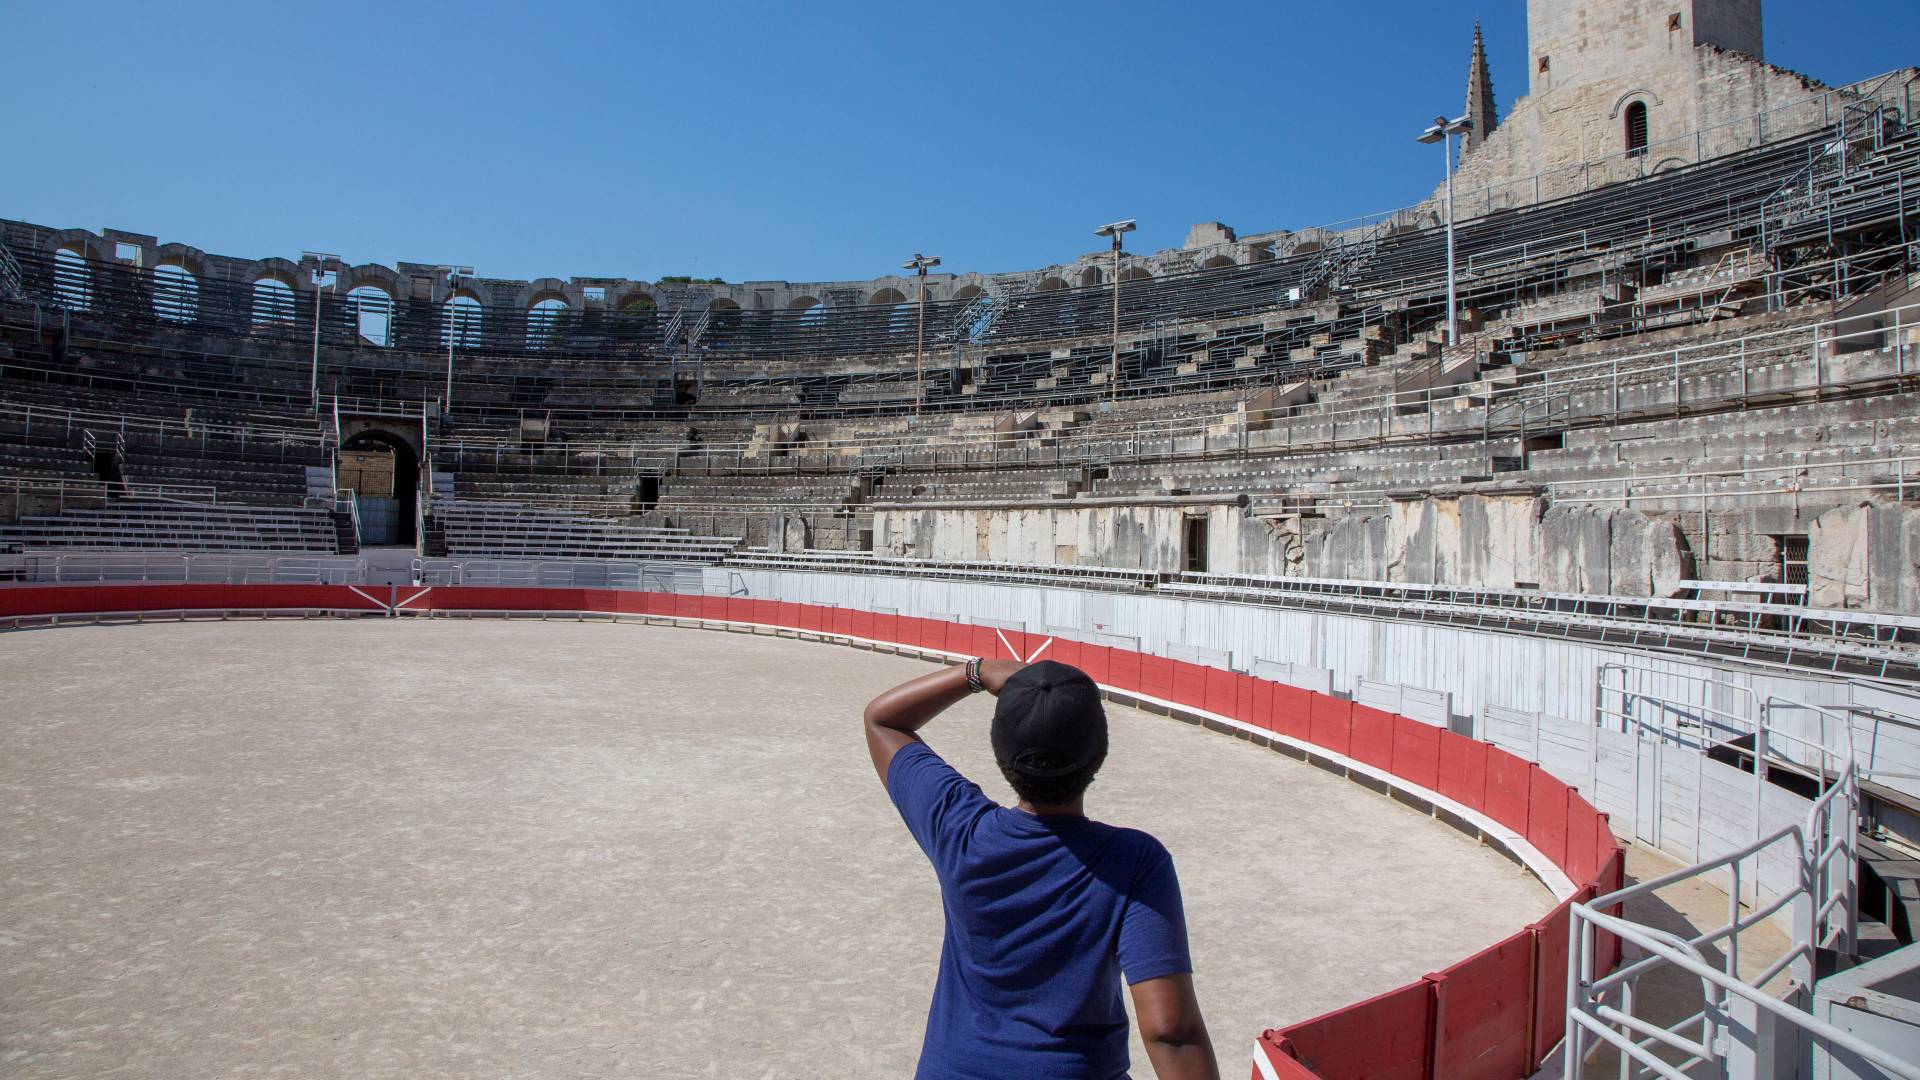 Student looking at amphitheater in Arles, France